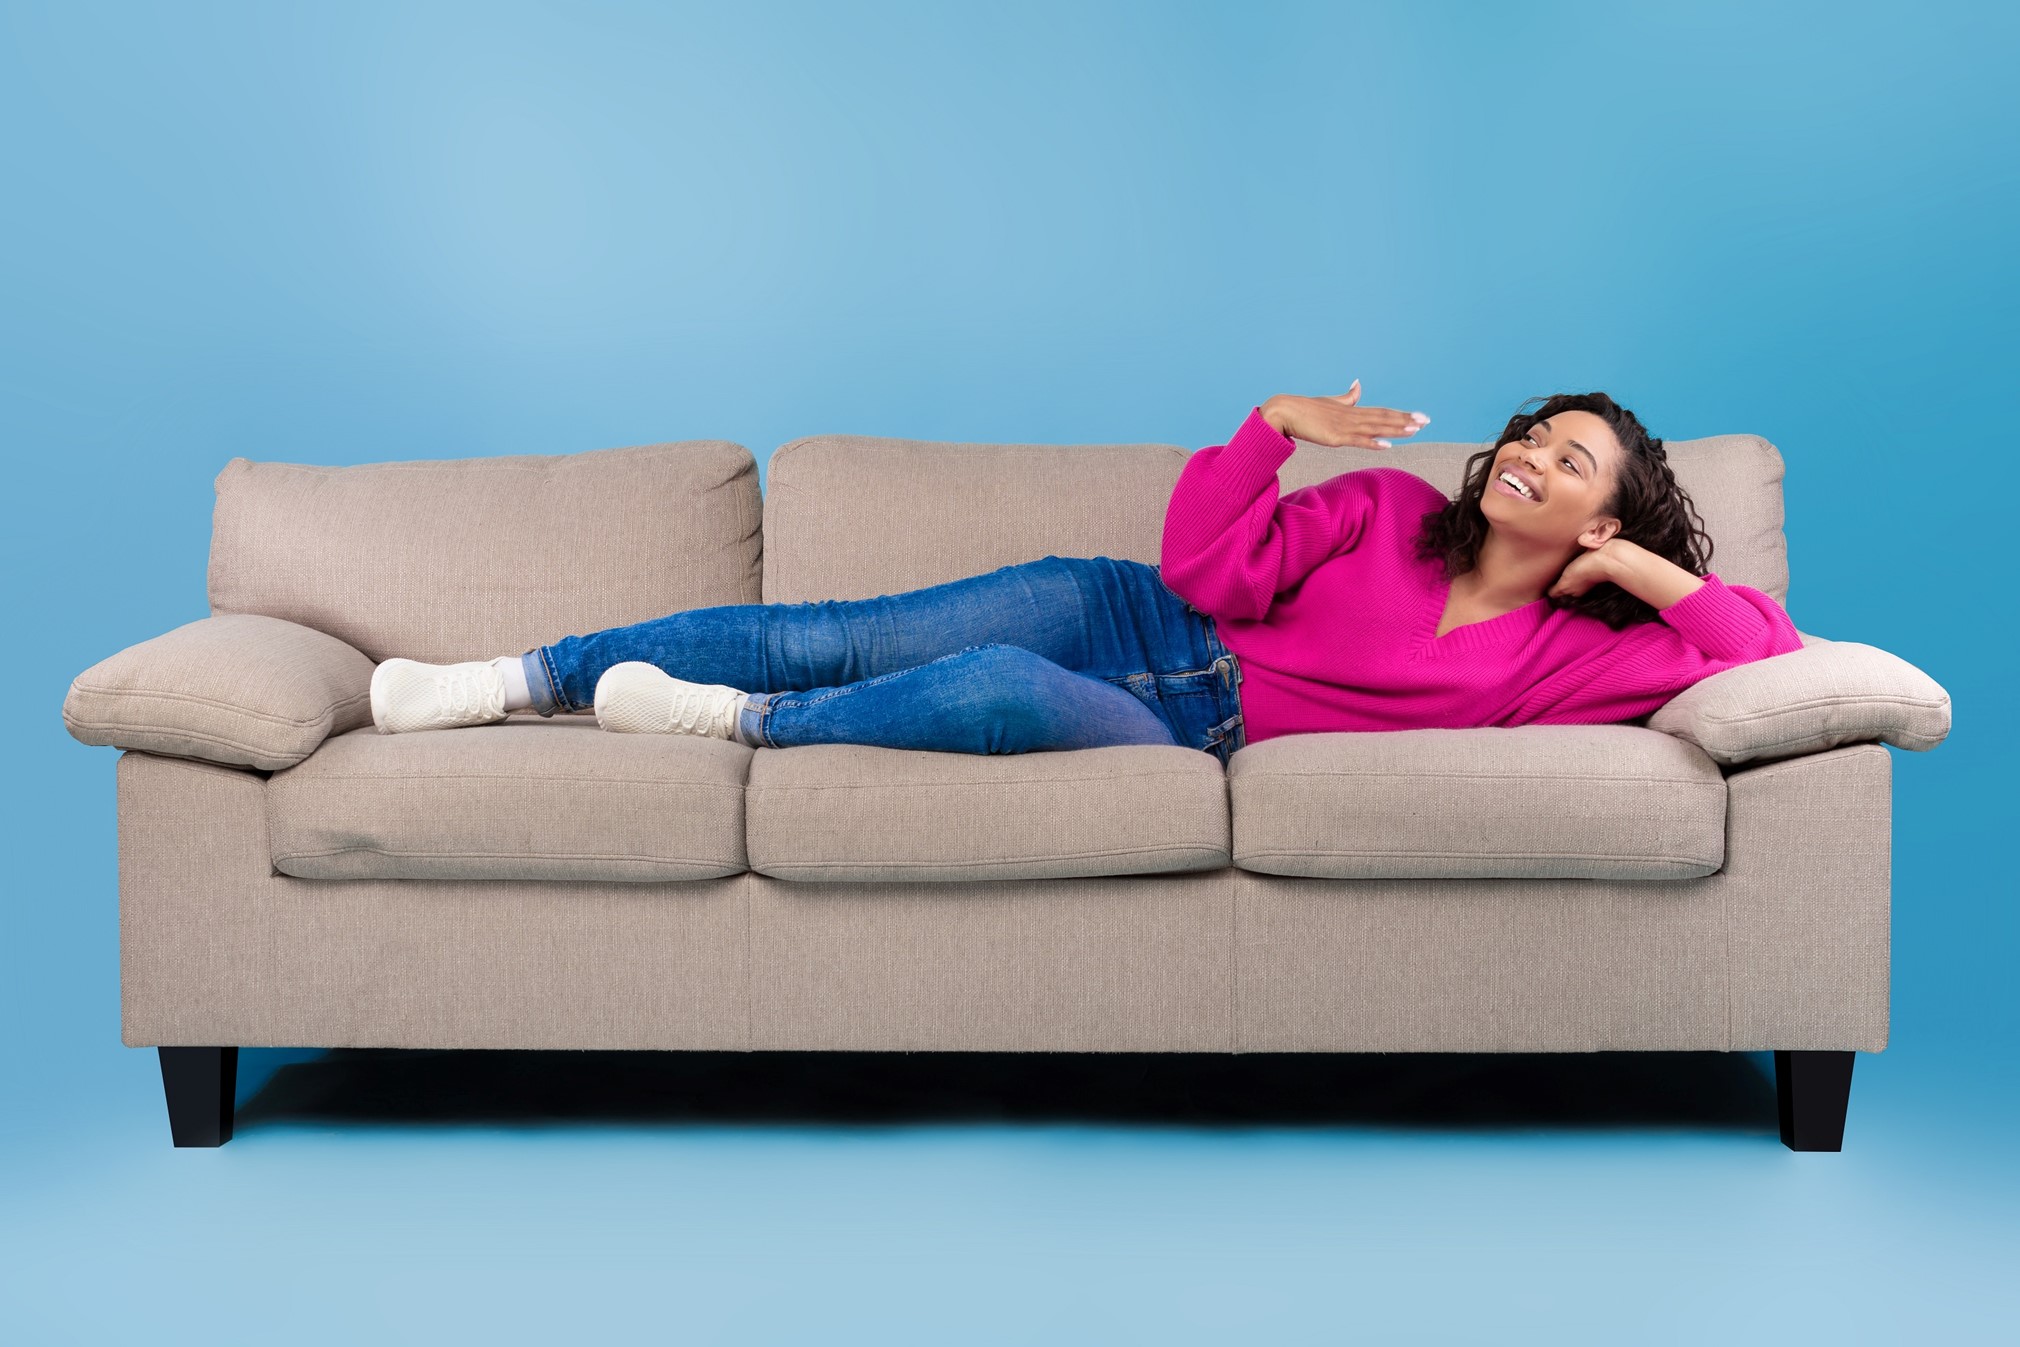 A smiling woman lies on a couch fanning herself as if to show she is moving cool air from her air conditioner towards her